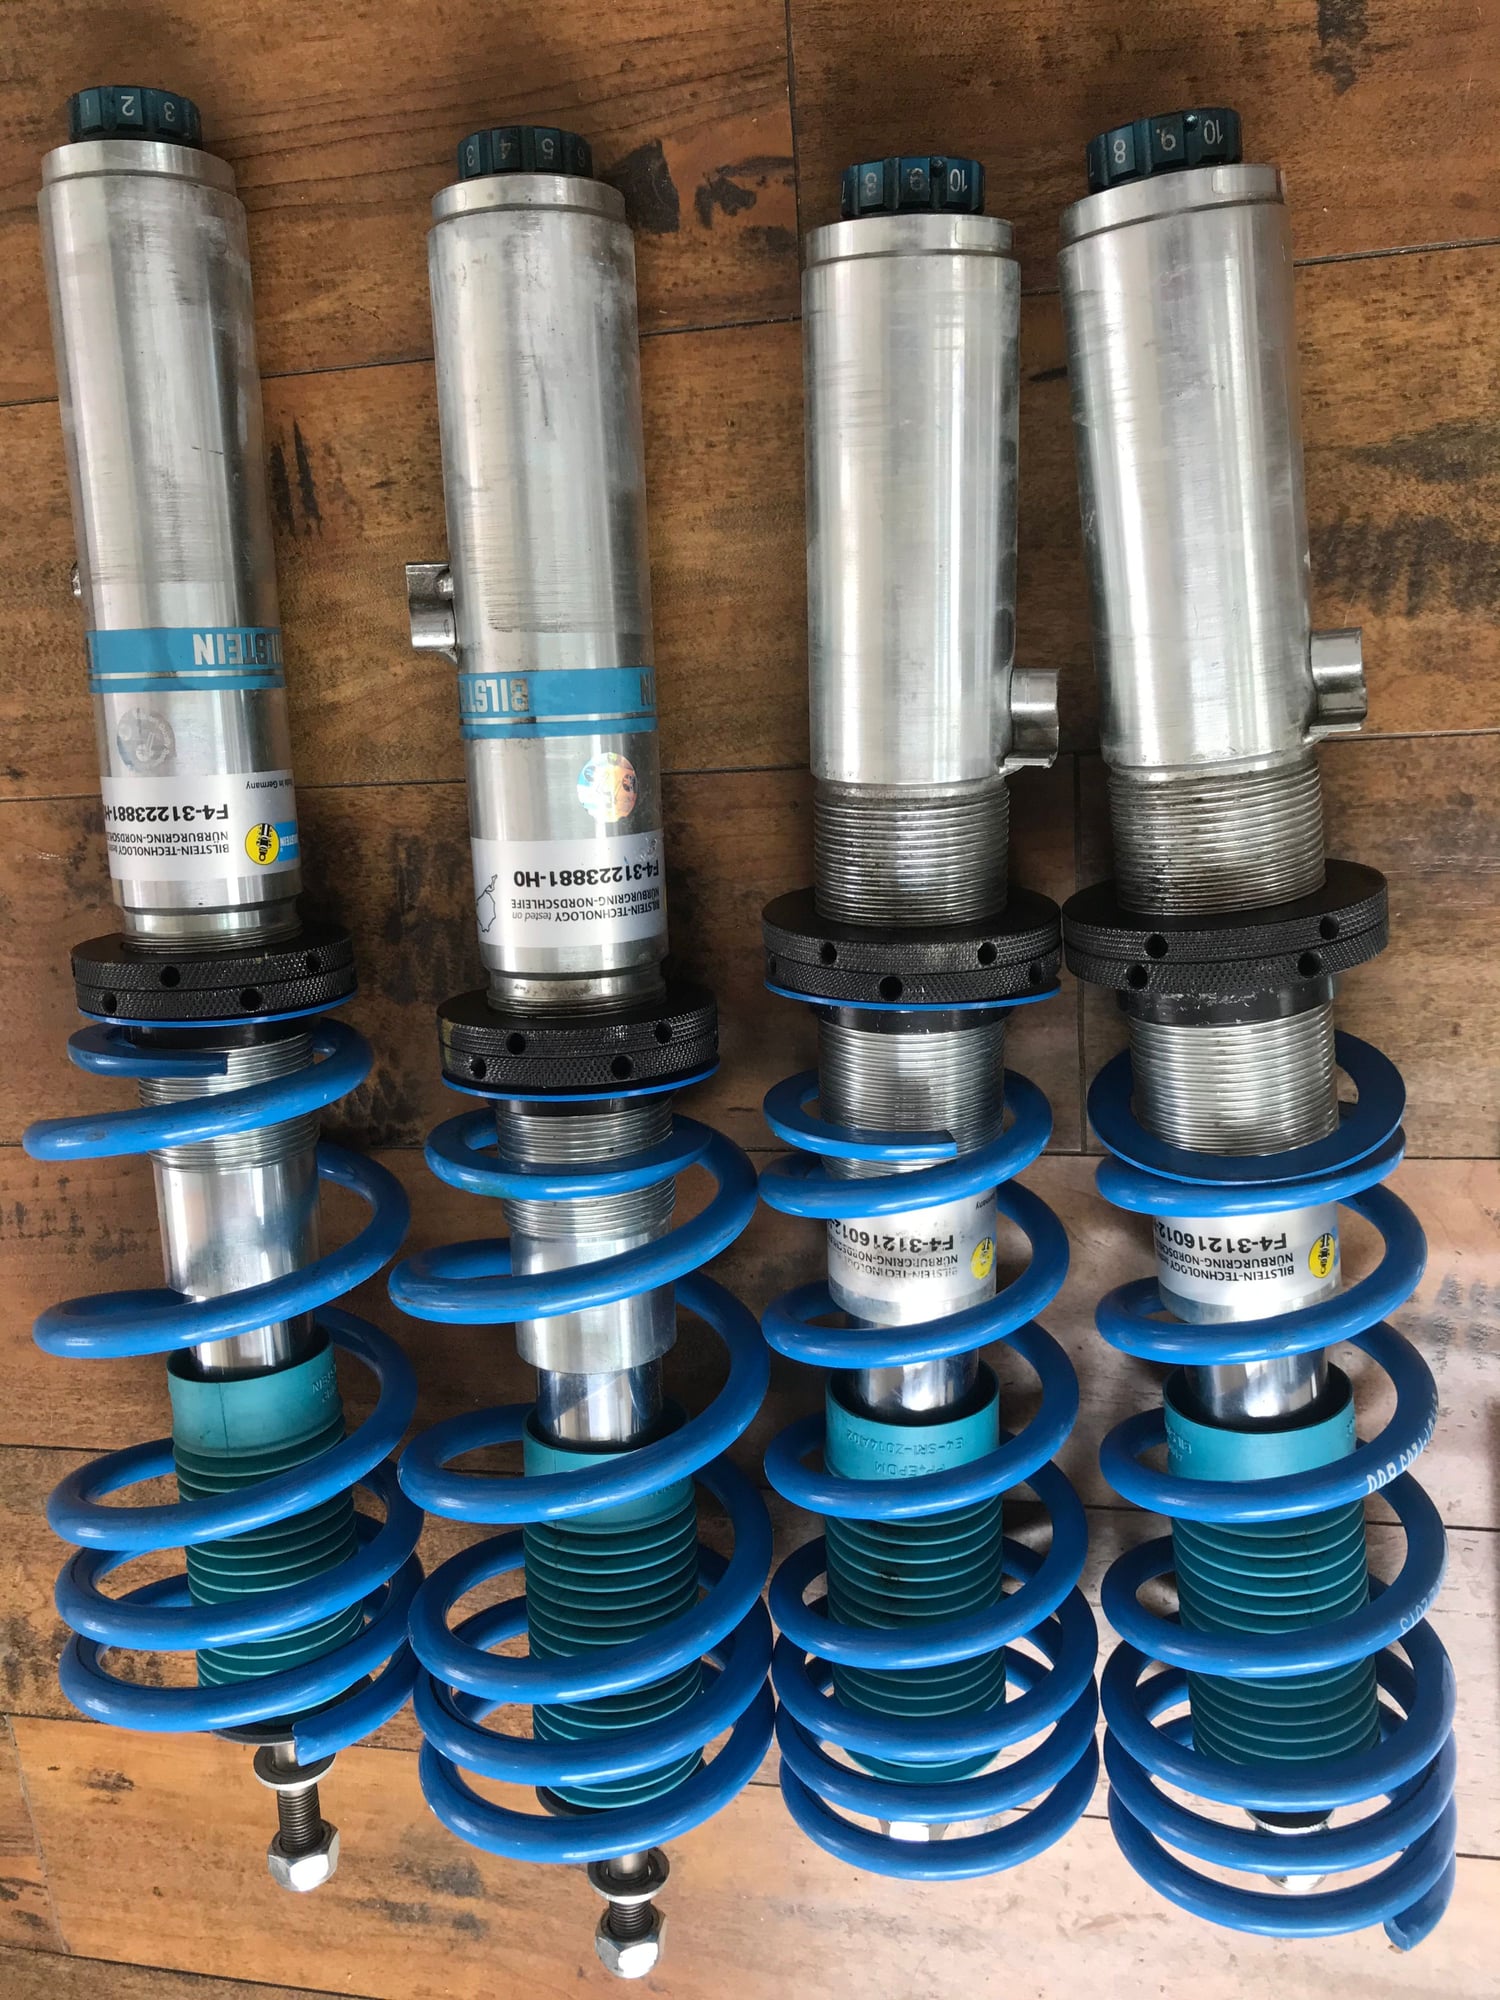 Steering/Suspension - Bilstein PSS10/PSS9 981 718 Boxster Cayman - Used - 2013 to 2017 Porsche Boxster - 2016 to 2017 Porsche 718 Boxster - 2016 to 2017 Porsche 718 Cayman - 2013 to 2017 Porsche Cayman - Whittier Hills,, CA 90601, United States